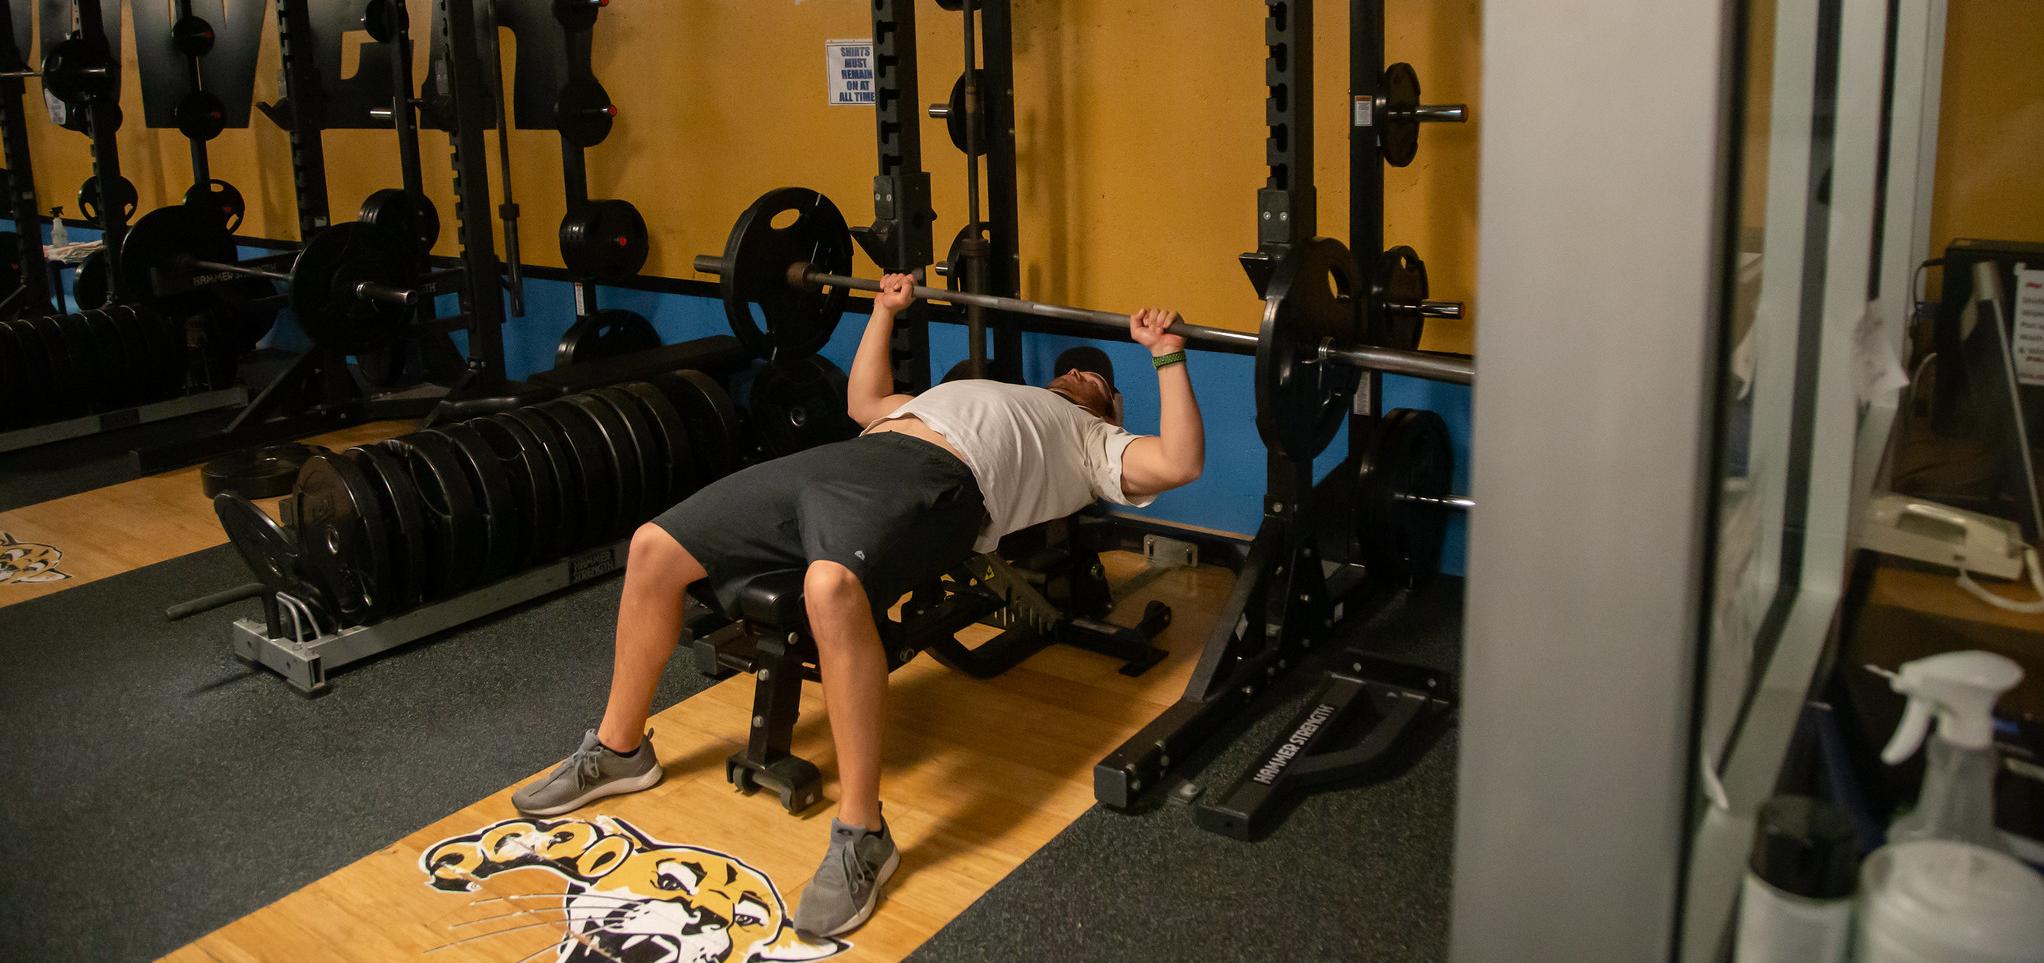 Student lifts weights in the workout room